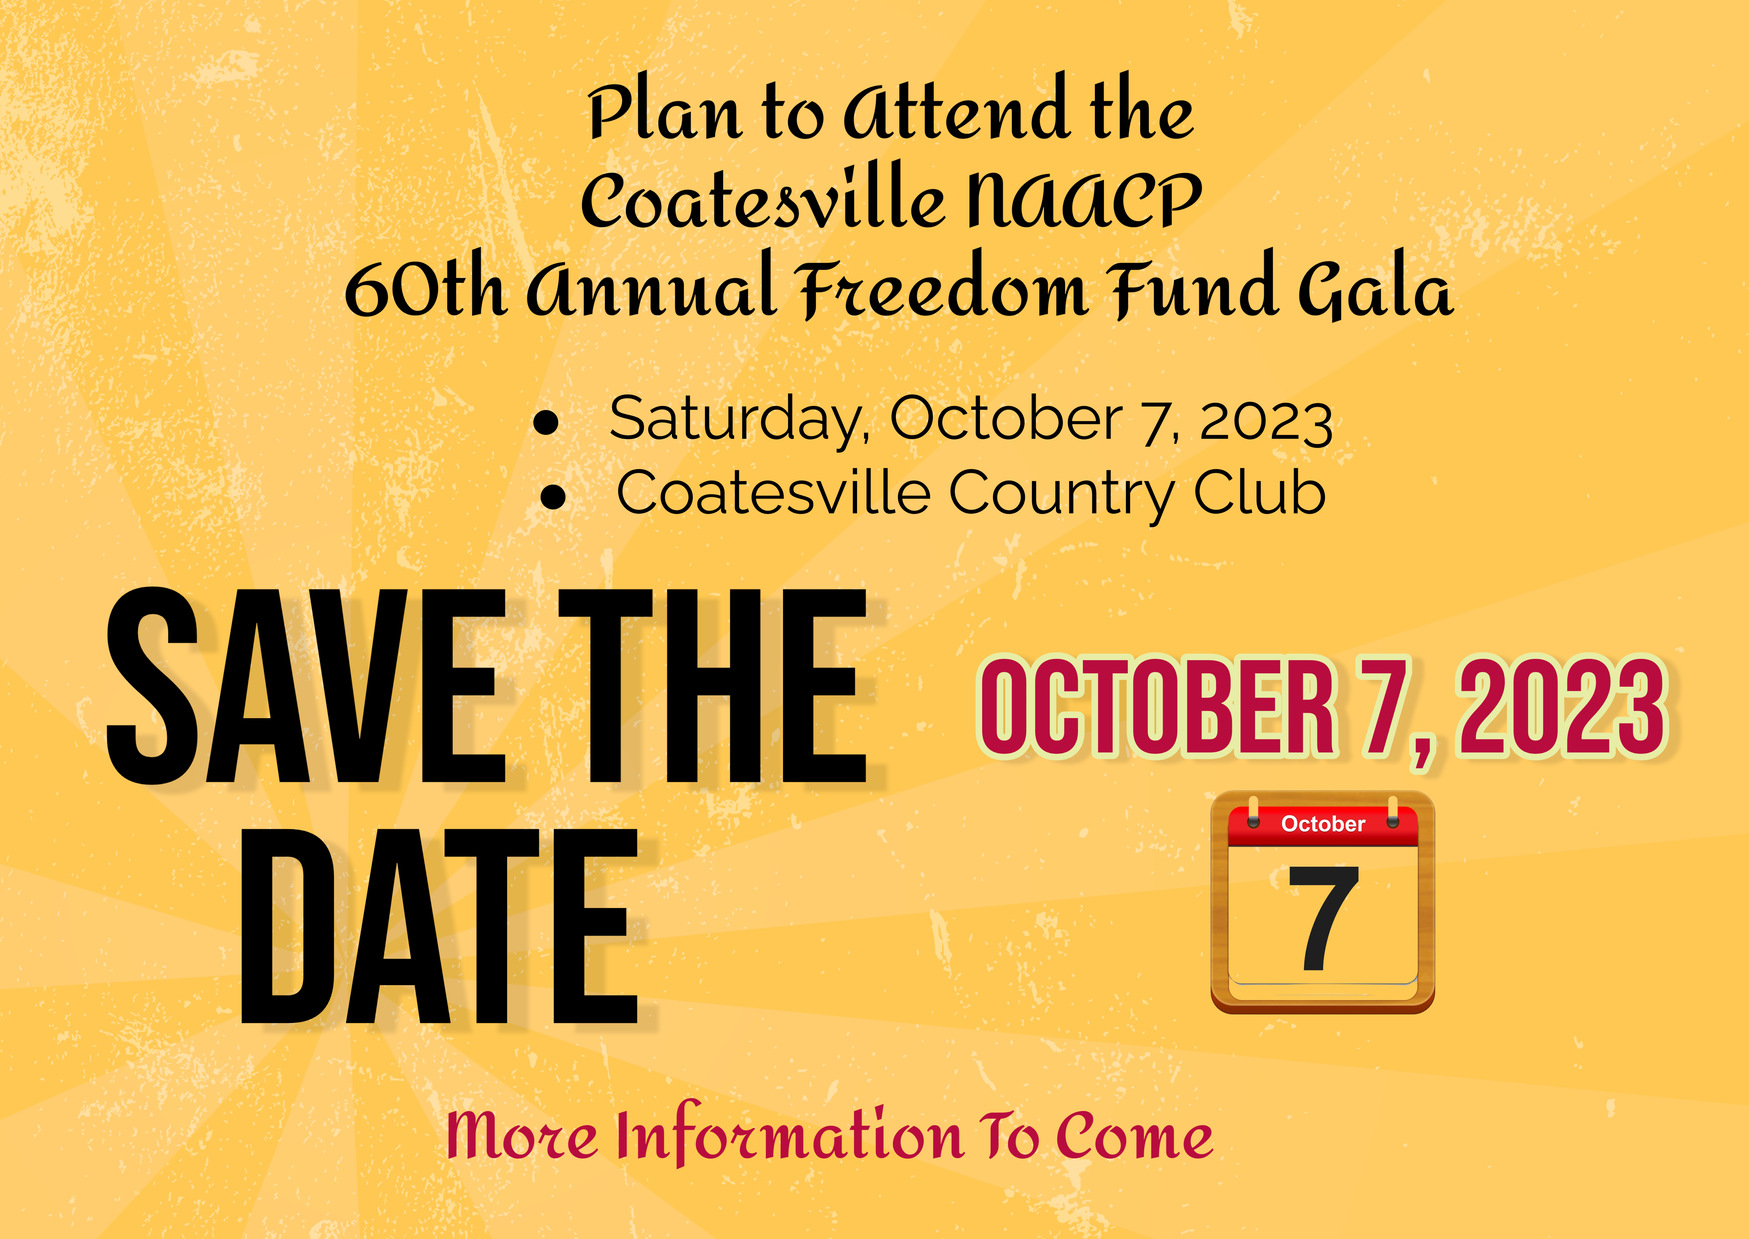 Save the date: October 7th 2023 for the 60th Annual Freedom Fund Gala at the Coatesville Country Club!